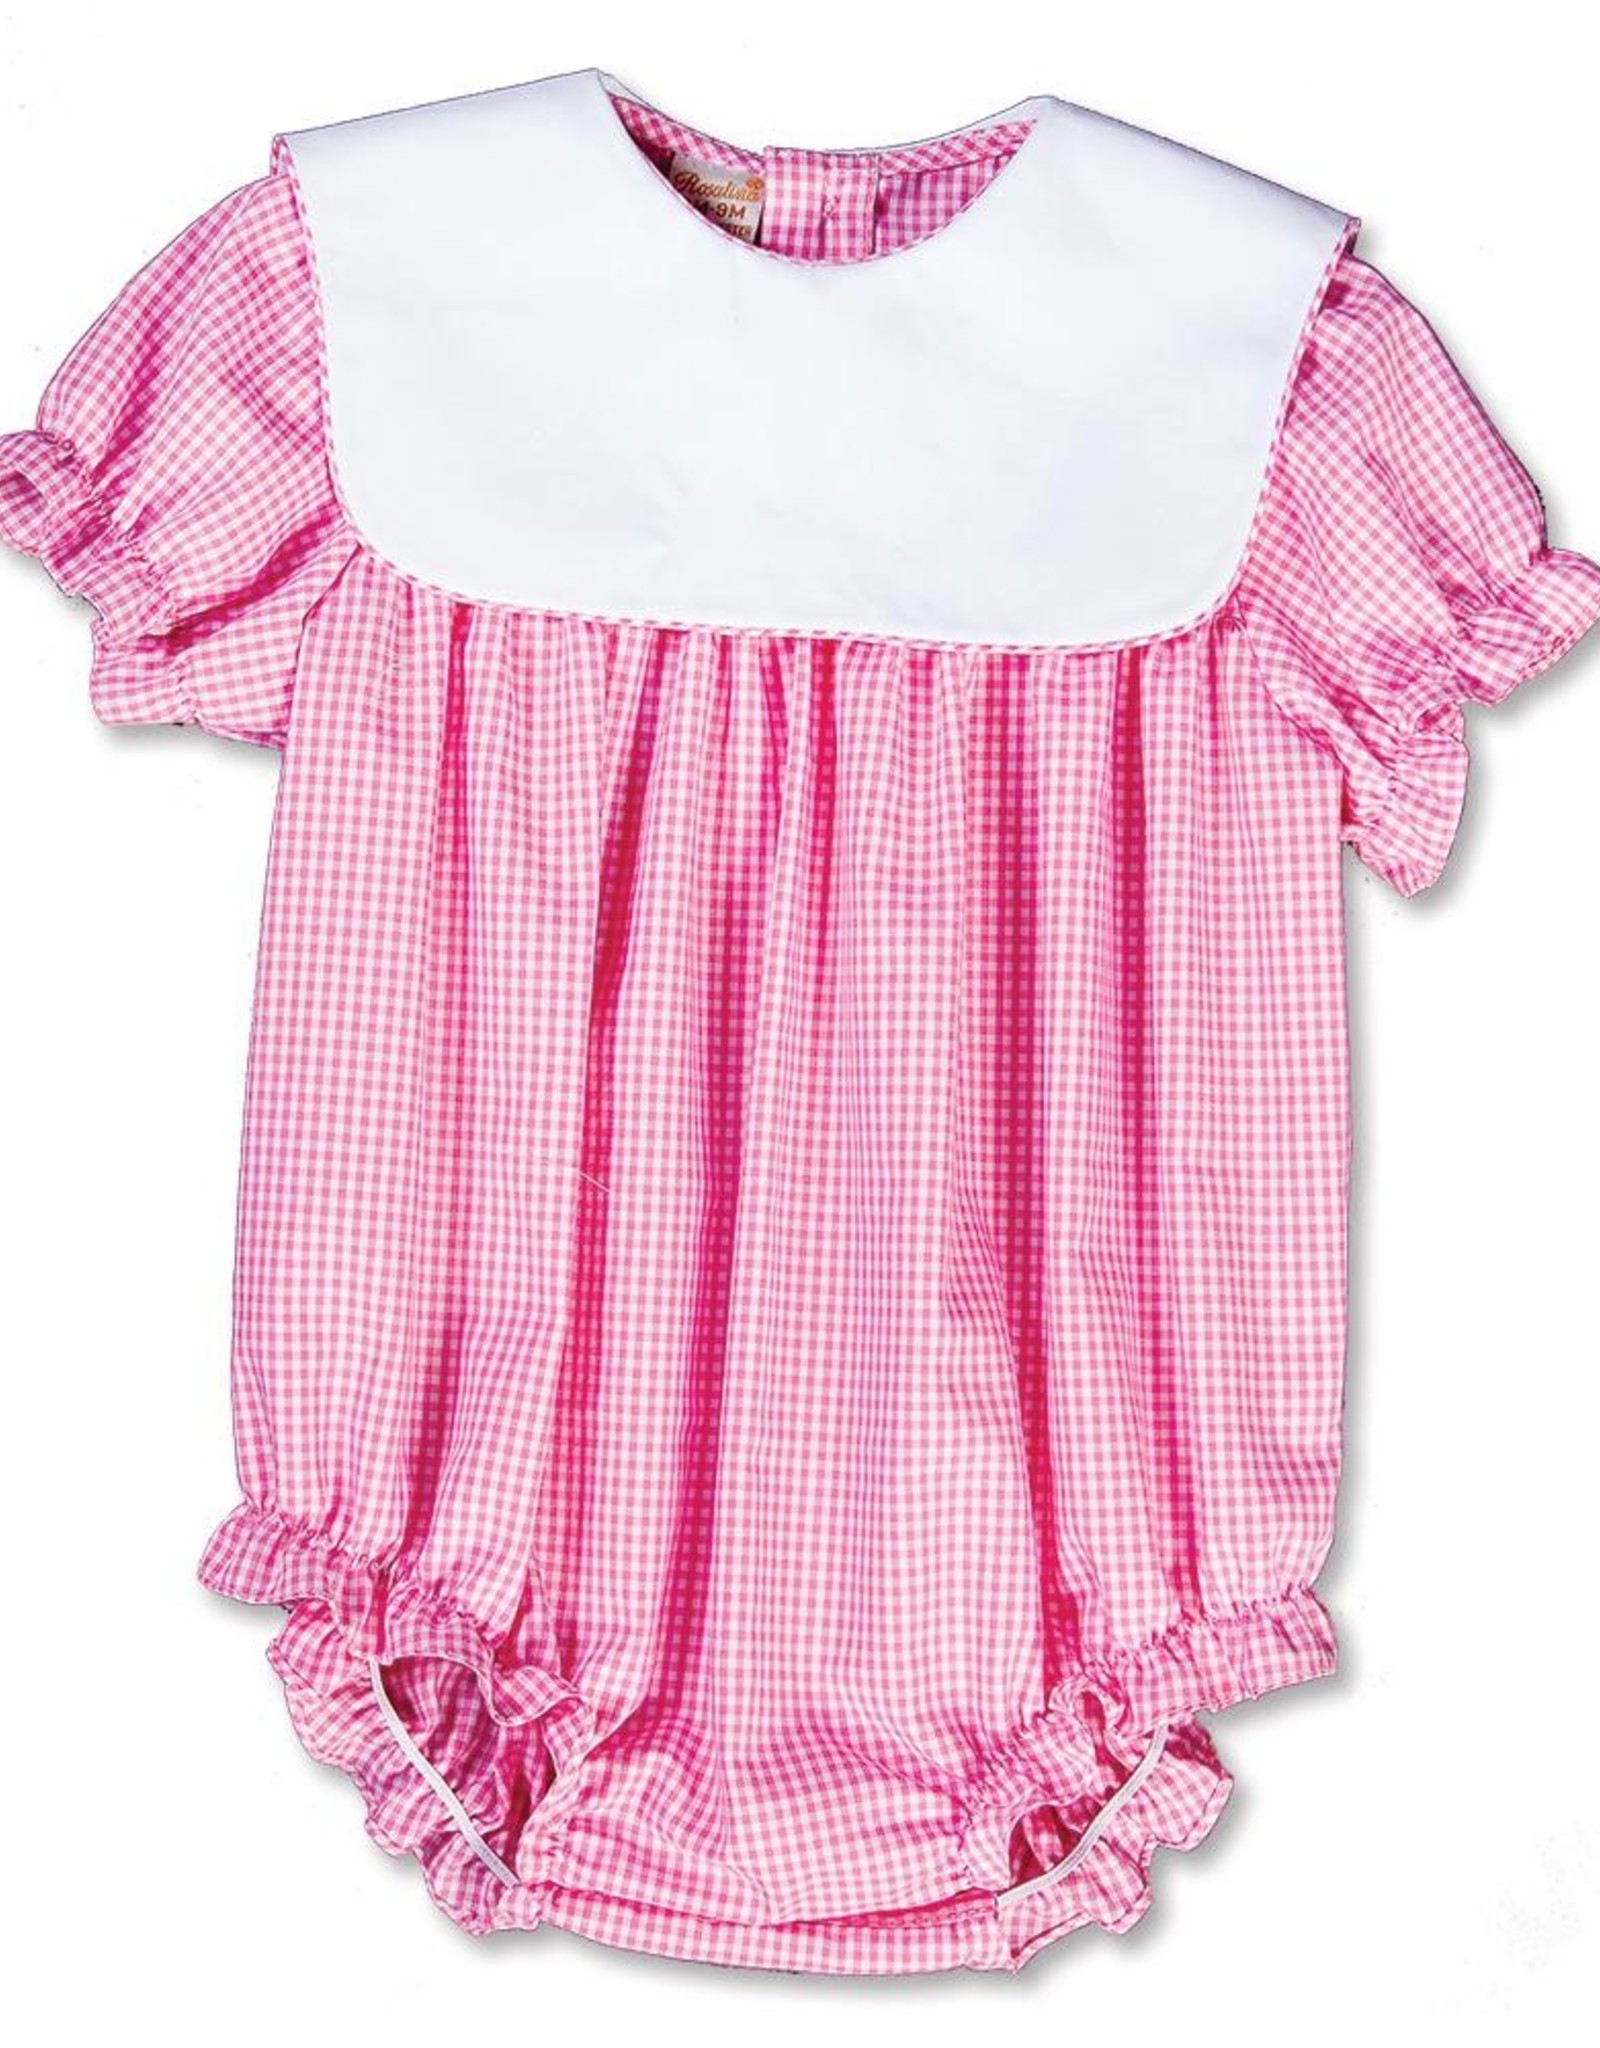 Rosalina Pink Gingham Girls Bubble With White Collar